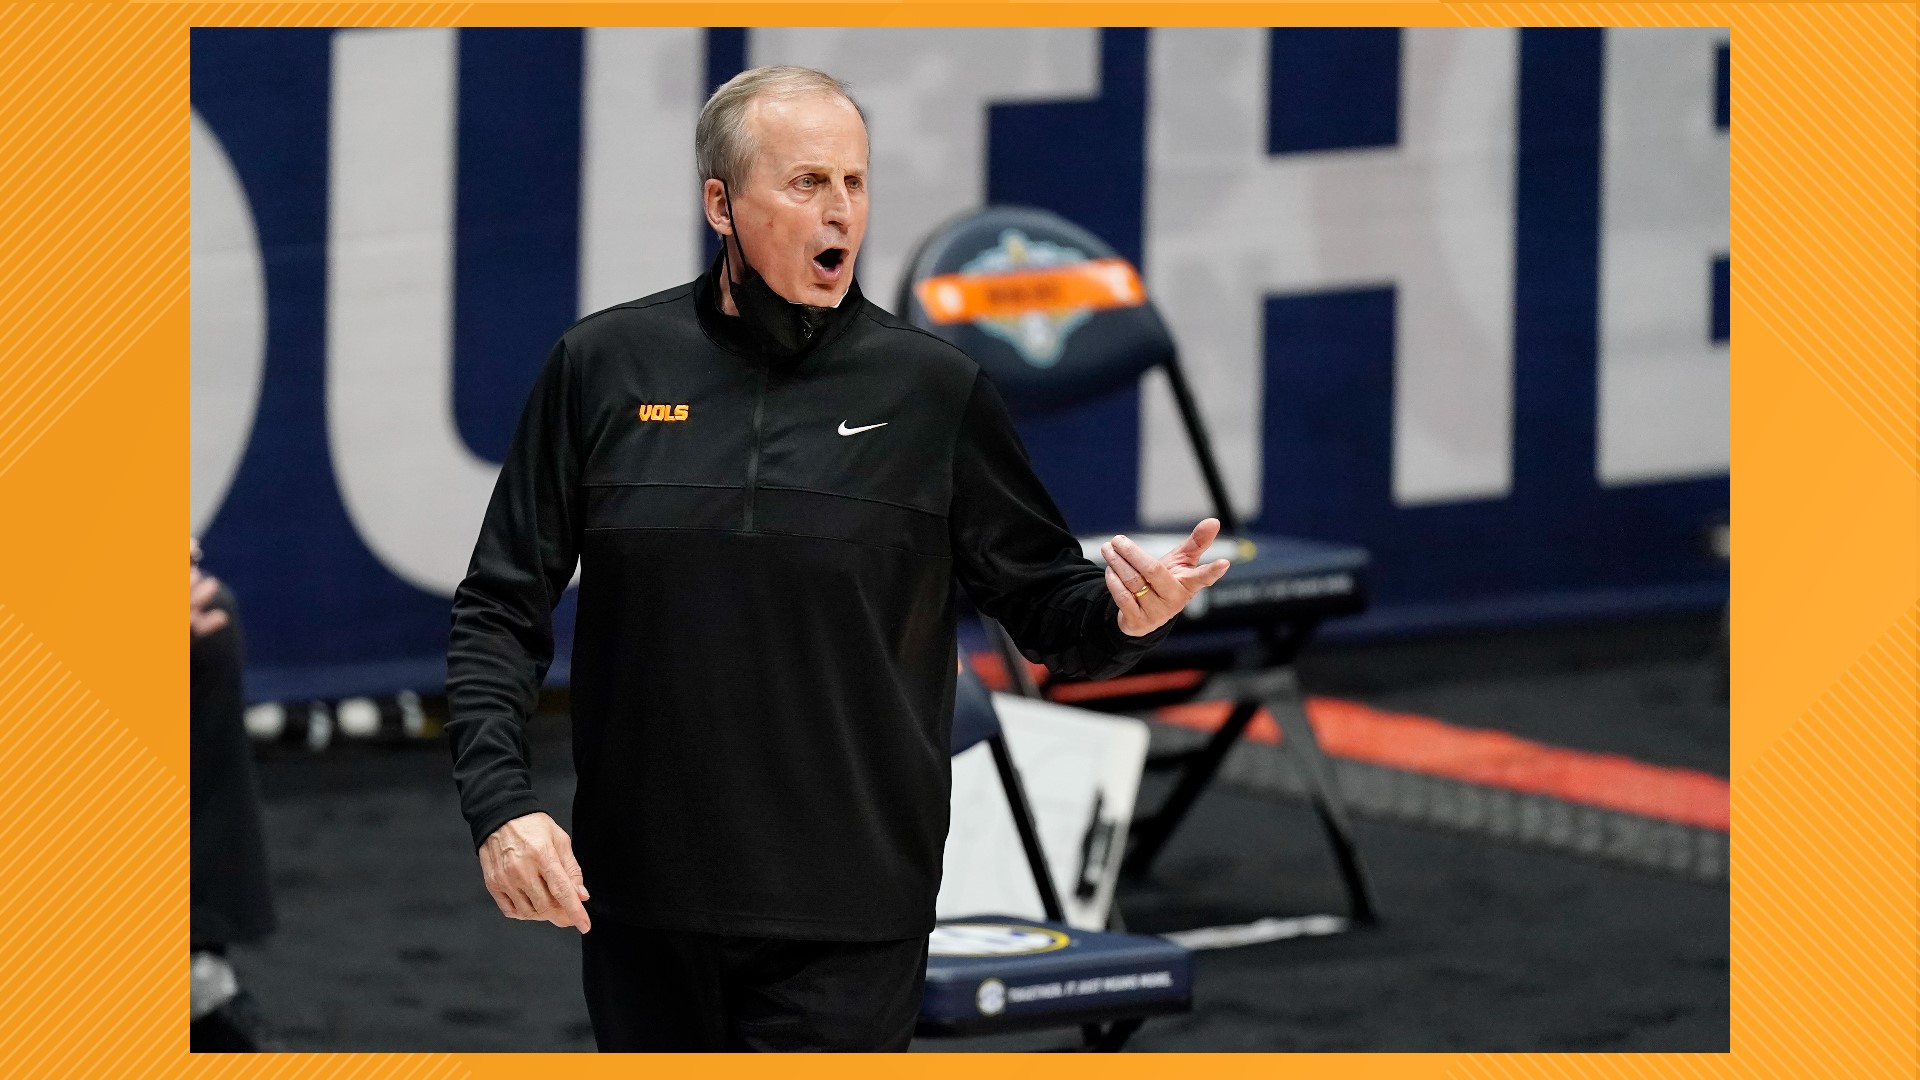 Vols head coach Rick Barnes spoke on how his young team is acclimating and how upperclassmen leadership has been great.